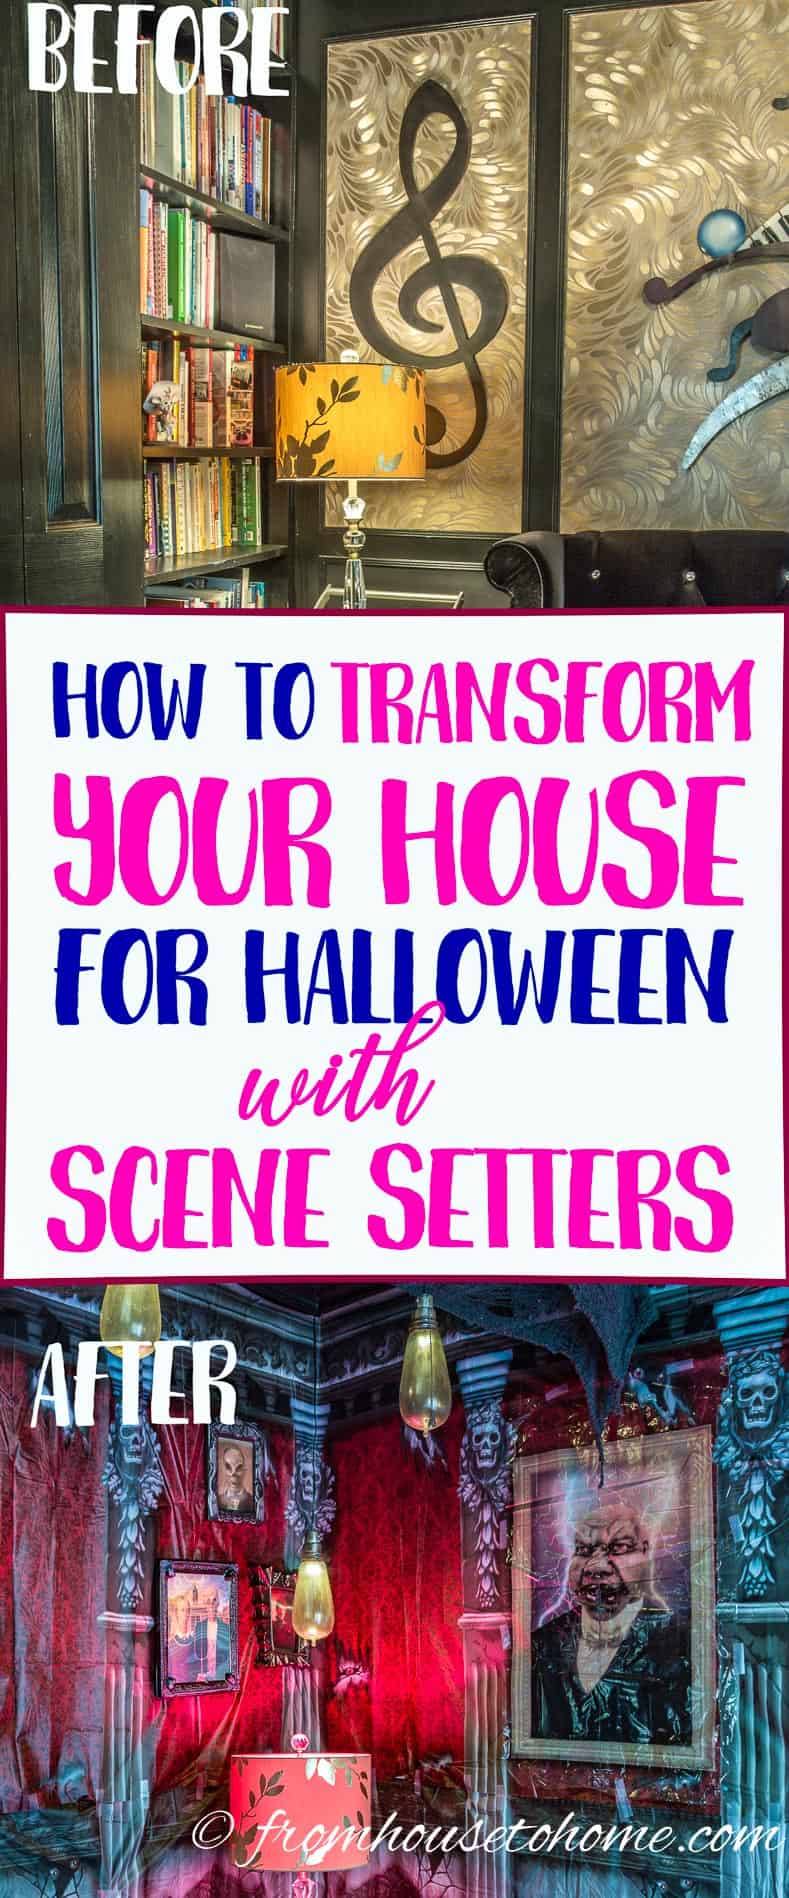 How To Transform Your House For Halloween With Scene Setters